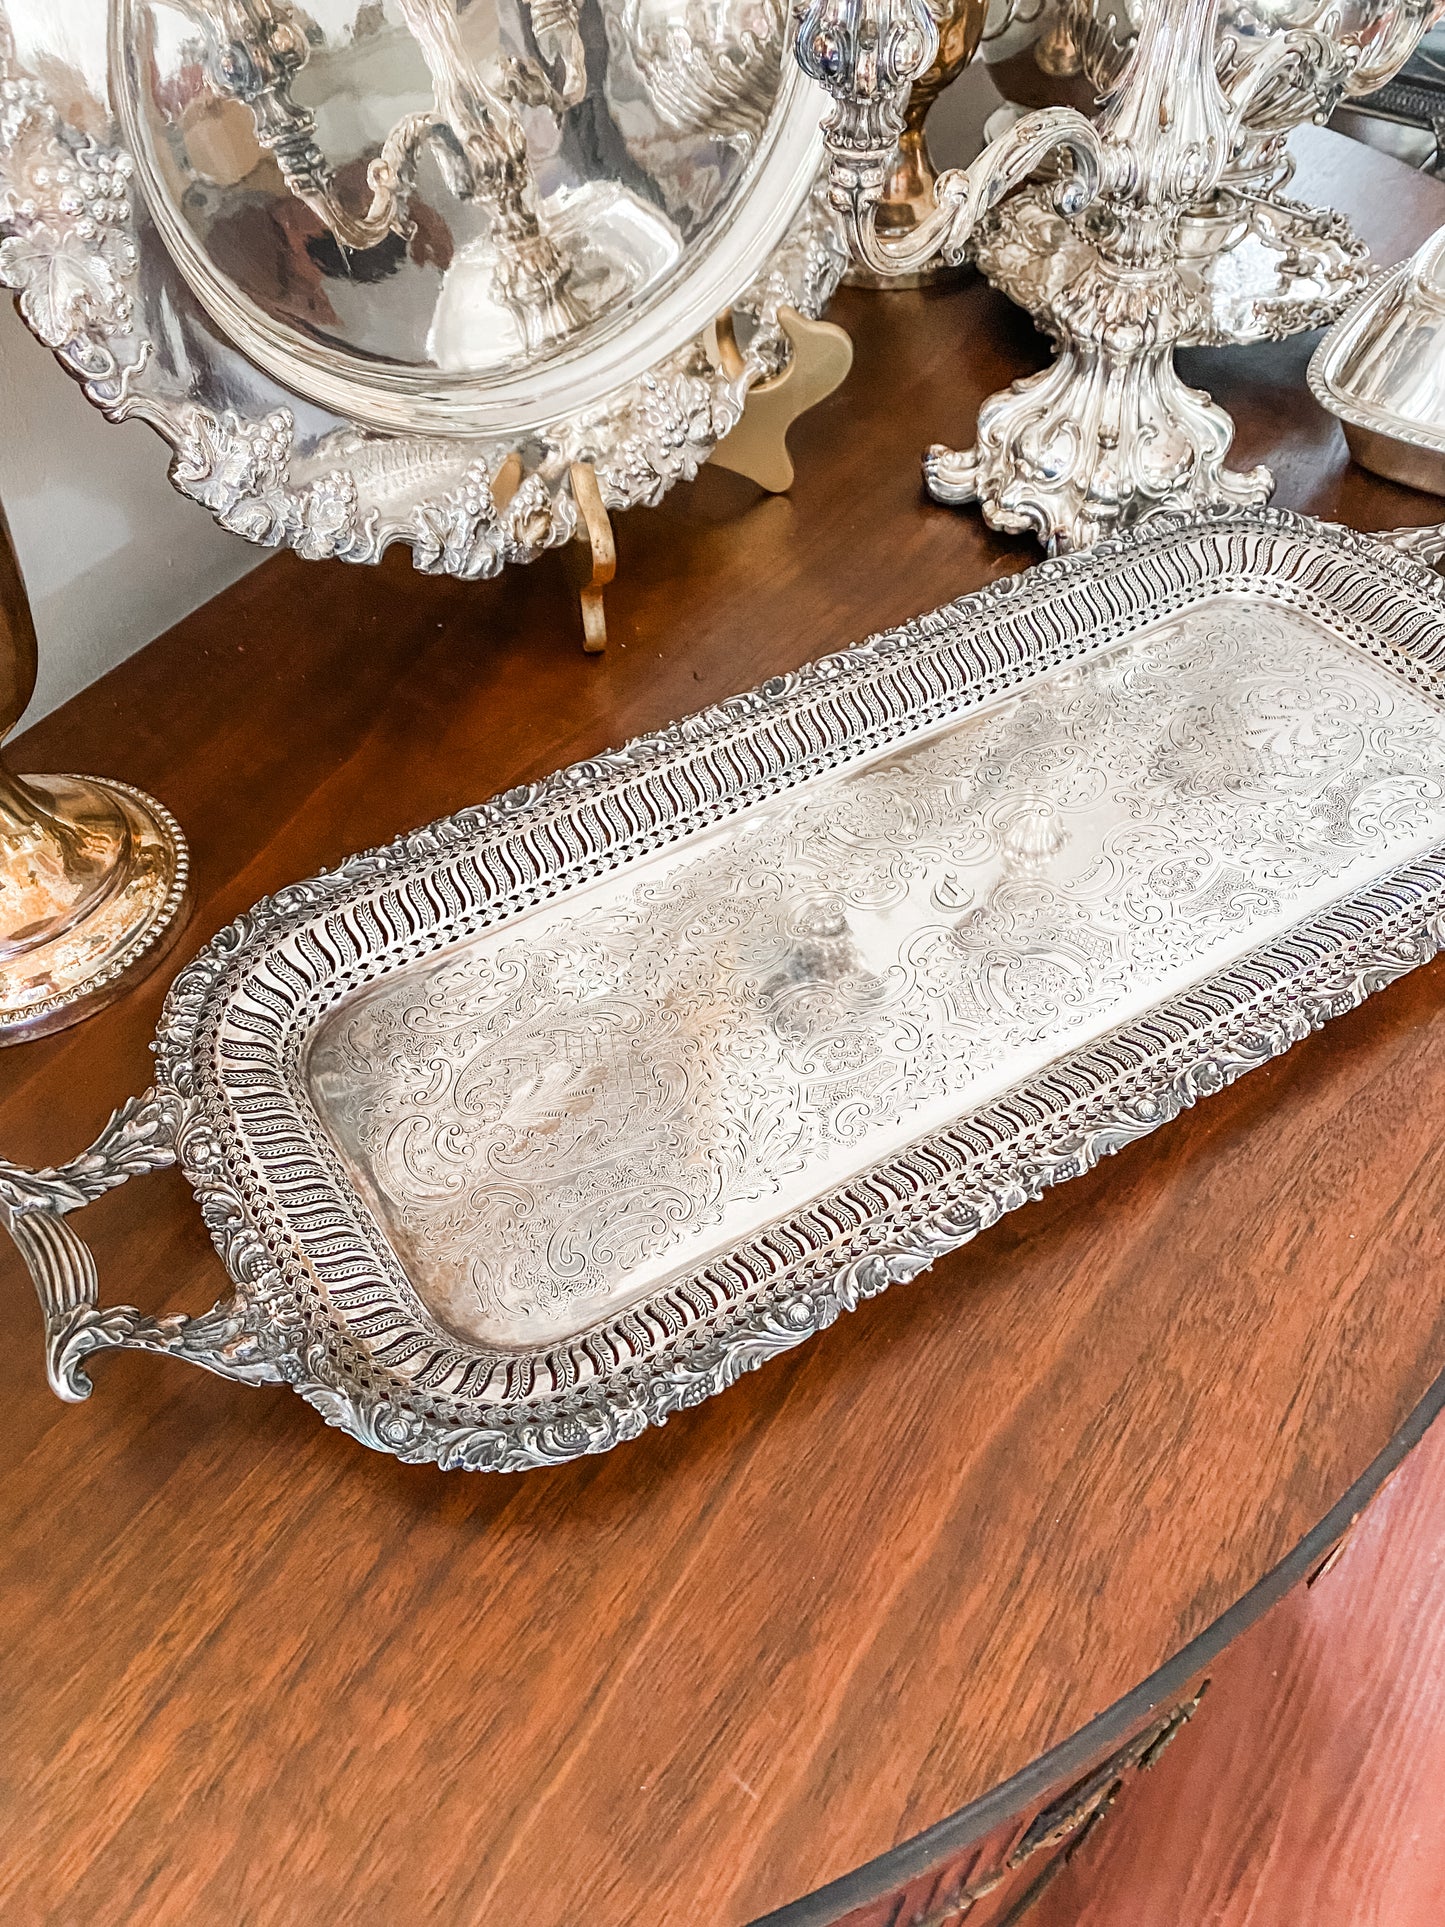 Outstanding English Antique 2 Foot Rectangular Pierced Tray